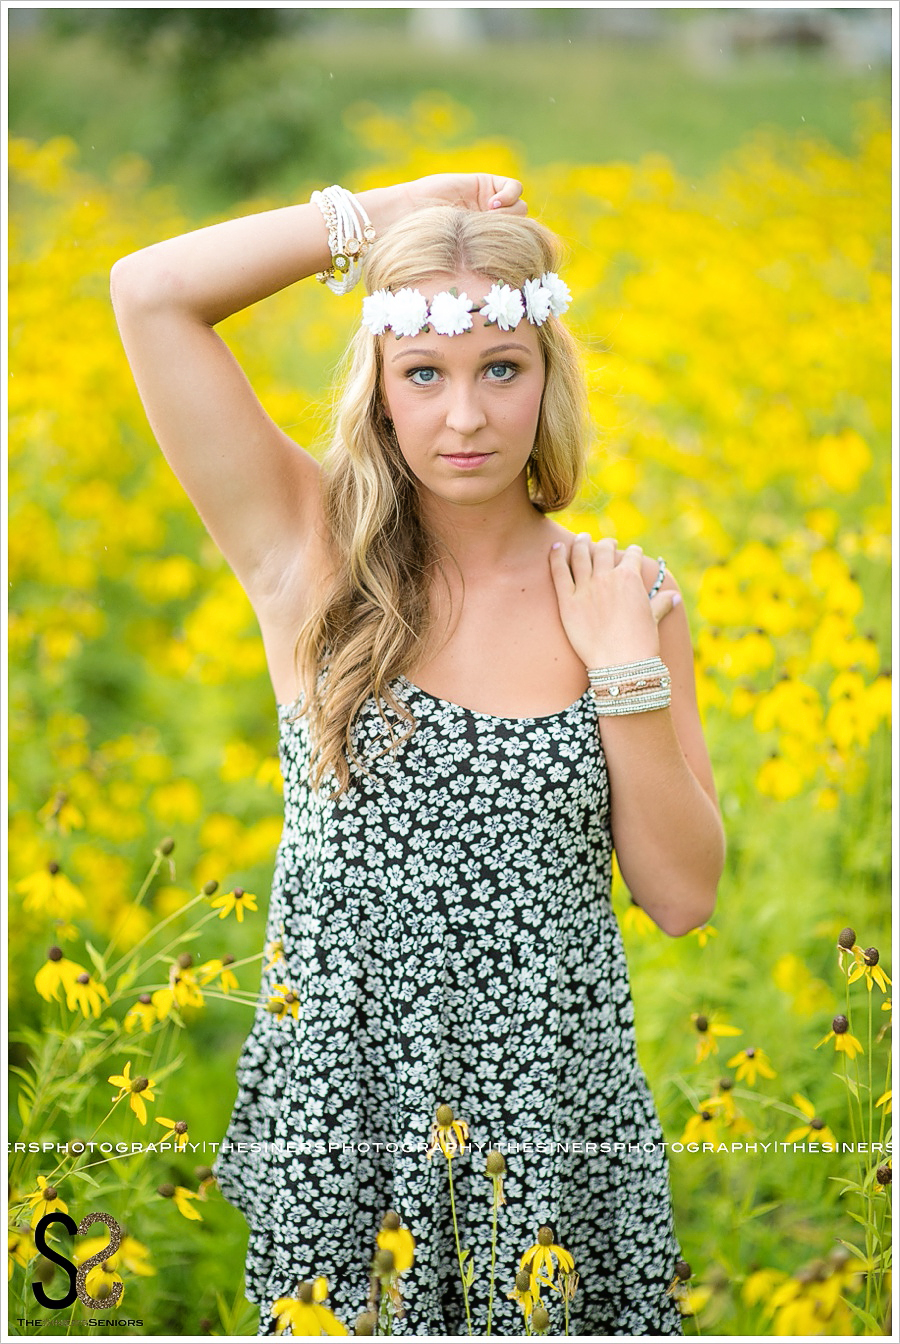 Cassidy_Indianapolis Senior Photographer_TheSinersPhotography_0003